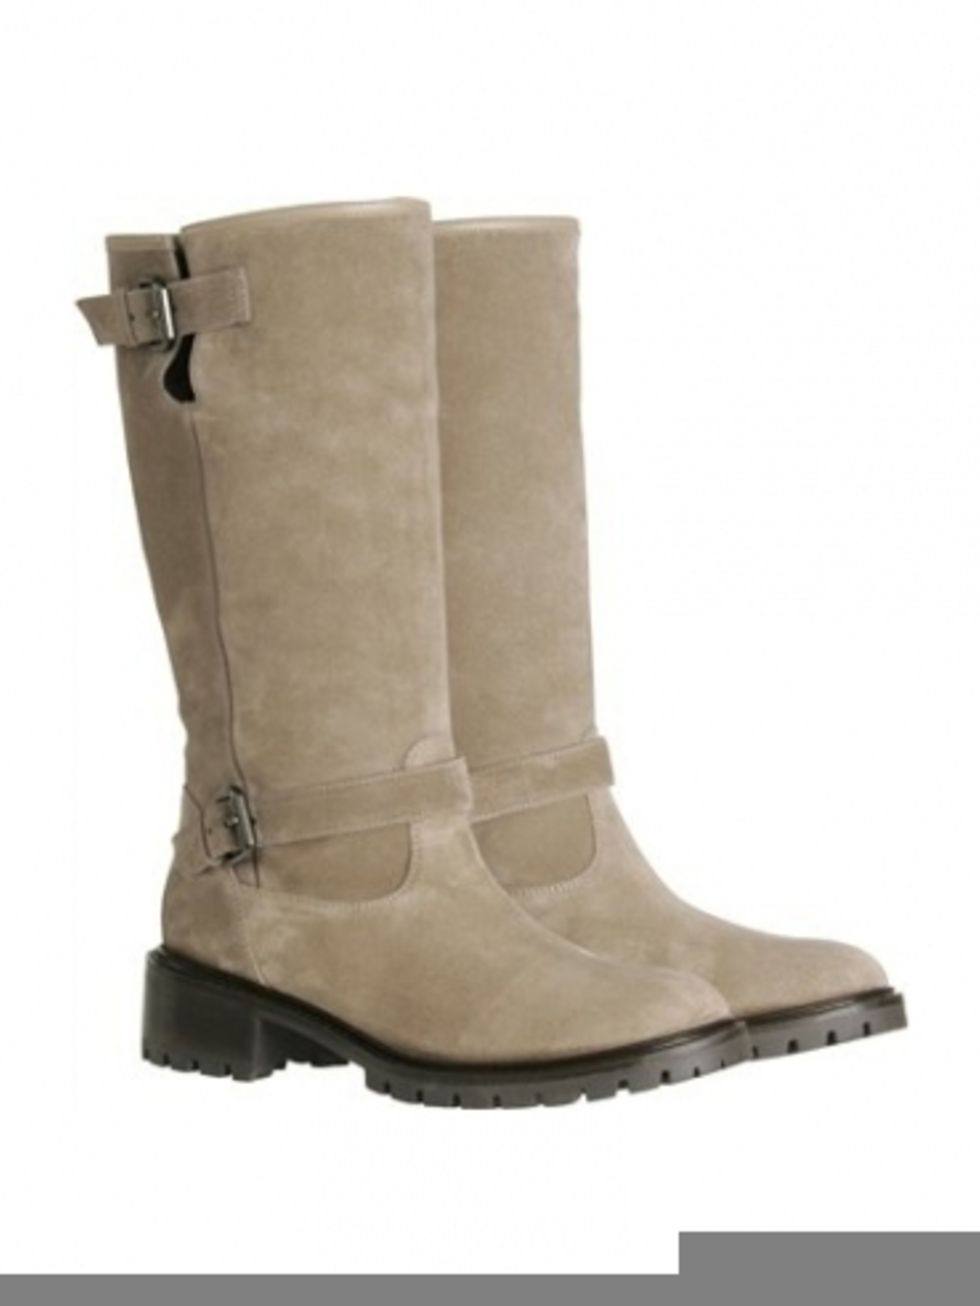 Brown, Boot, Khaki, Tan, Beige, Riding boot, Leather, Snow boot, Steel-toe boot, Work boots, 